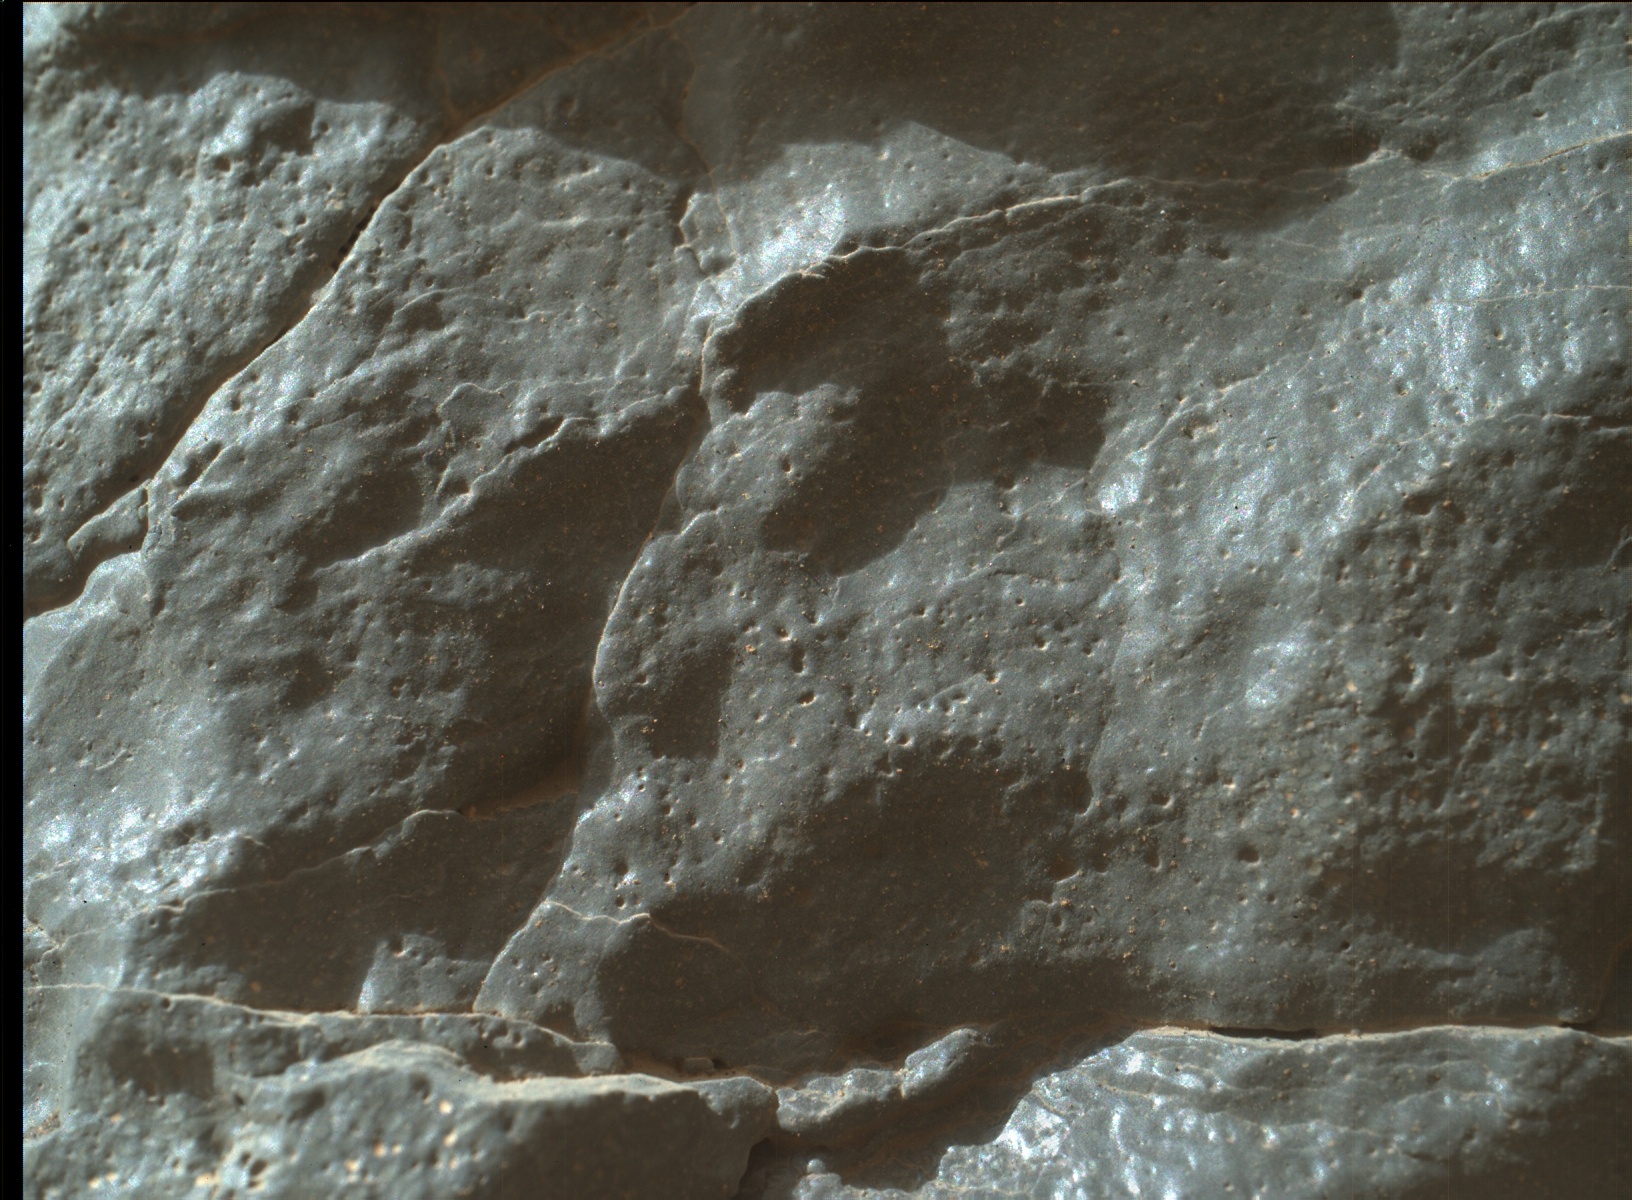 Nasa's Mars rover Curiosity acquired this image using its Mars Hand Lens Imager (MAHLI) on Sol 942